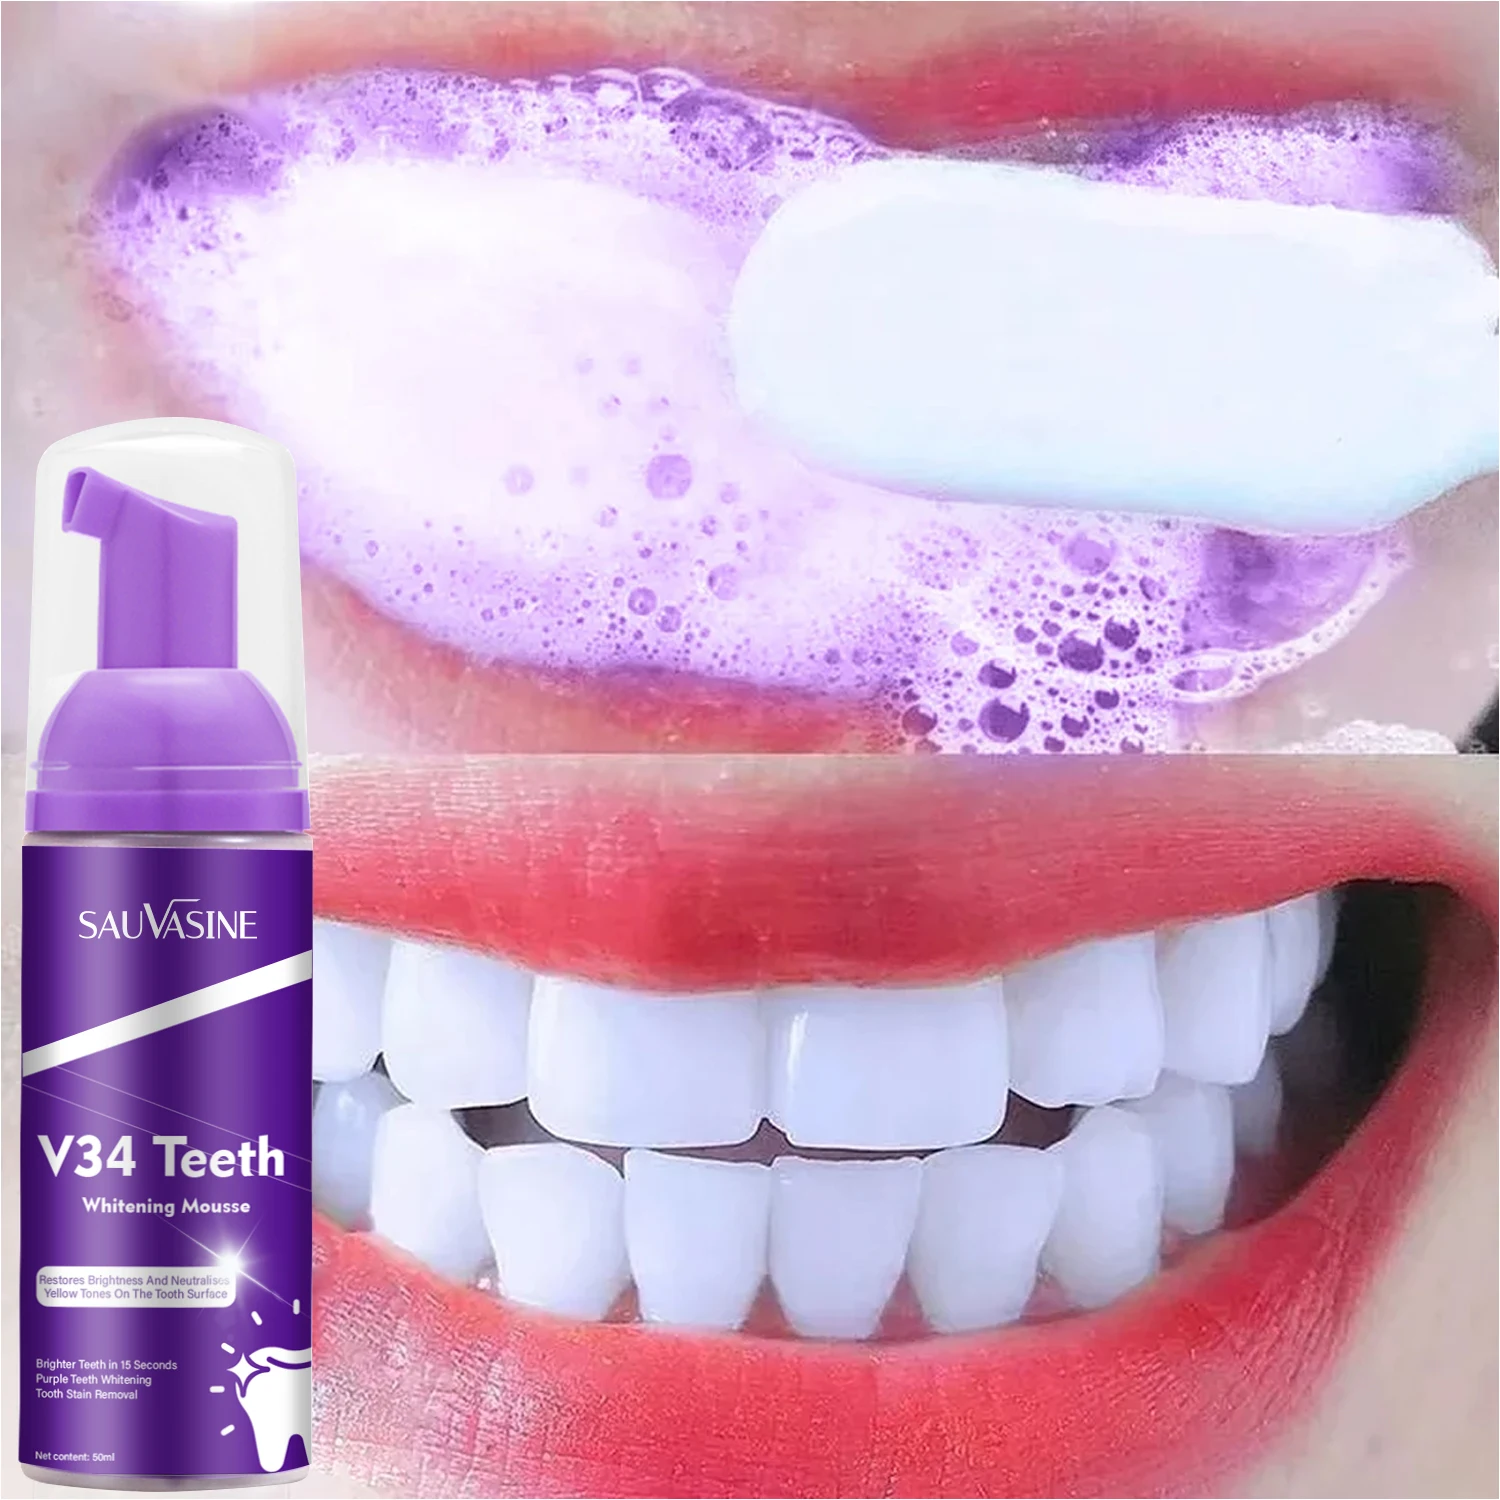 Teeth Whitening Product Effectively Remove Yellow Teeth Smoke Stain Remover Oral Hygiene Clean Dental Plaque Fresh Breath tooth whitening teeth powder remove yellow smoke coffee stains brighten tea stain fresh breath oral hygiene dental care tool